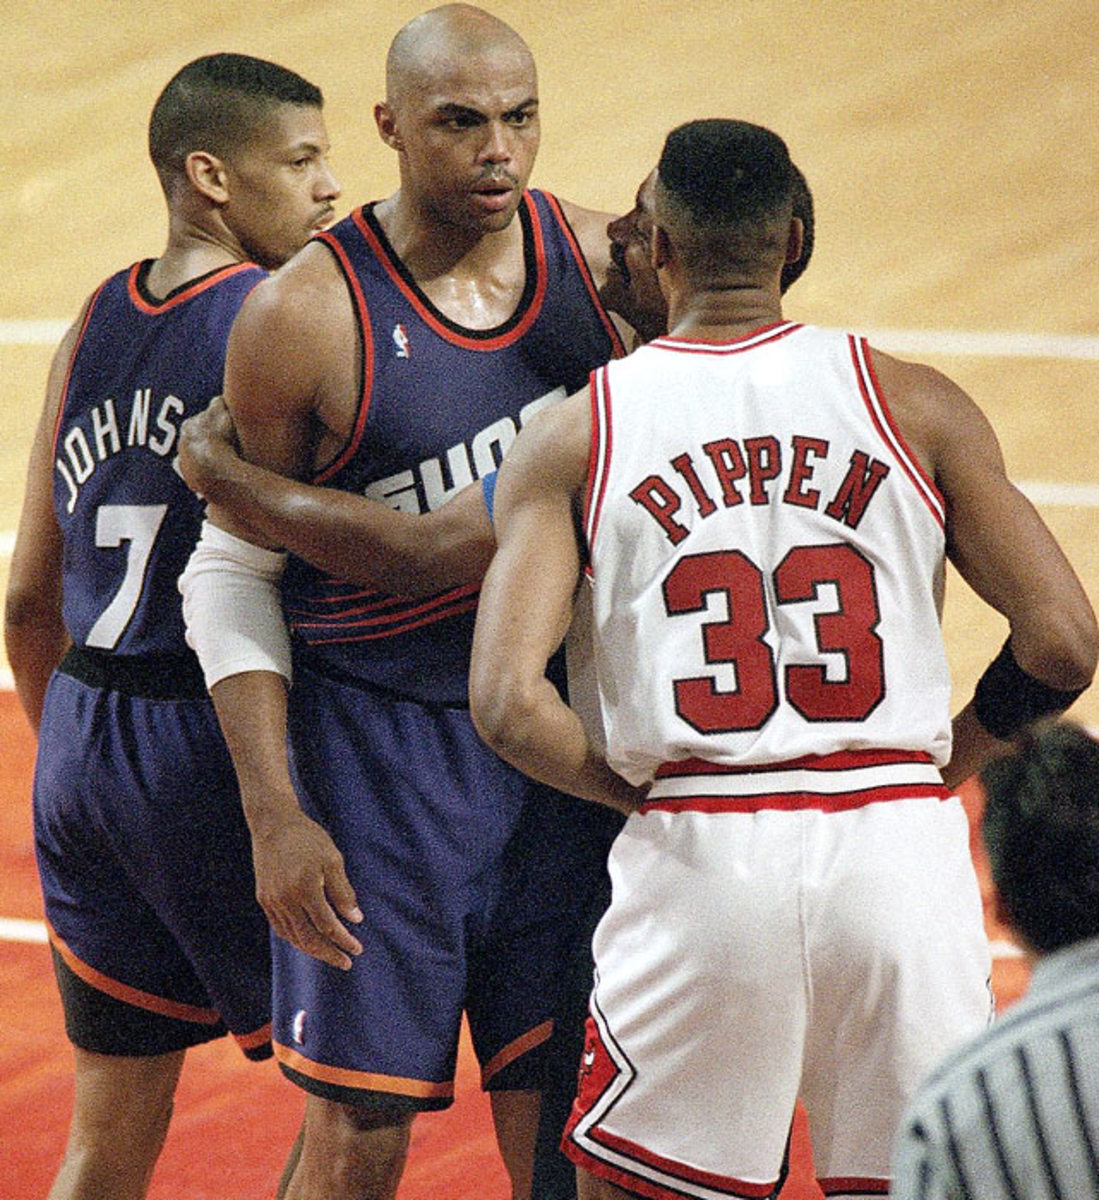 Scottie Pippen and Charles Barkley